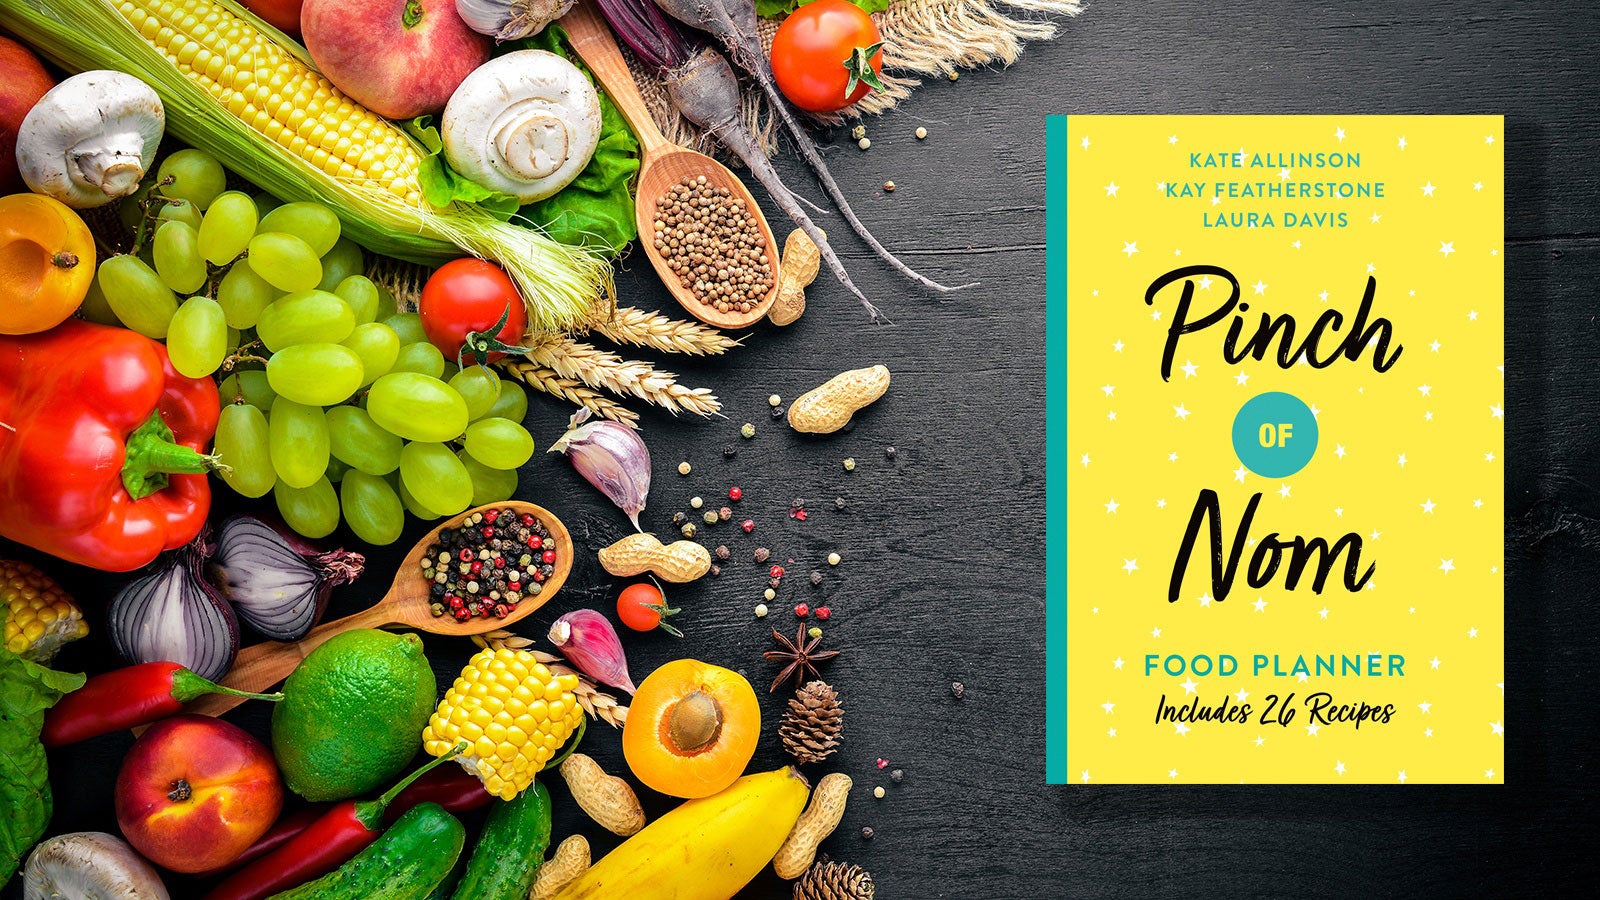 The Pinch of Nom Food Planner set on a black counter next to a pile of fruit and vegetables.